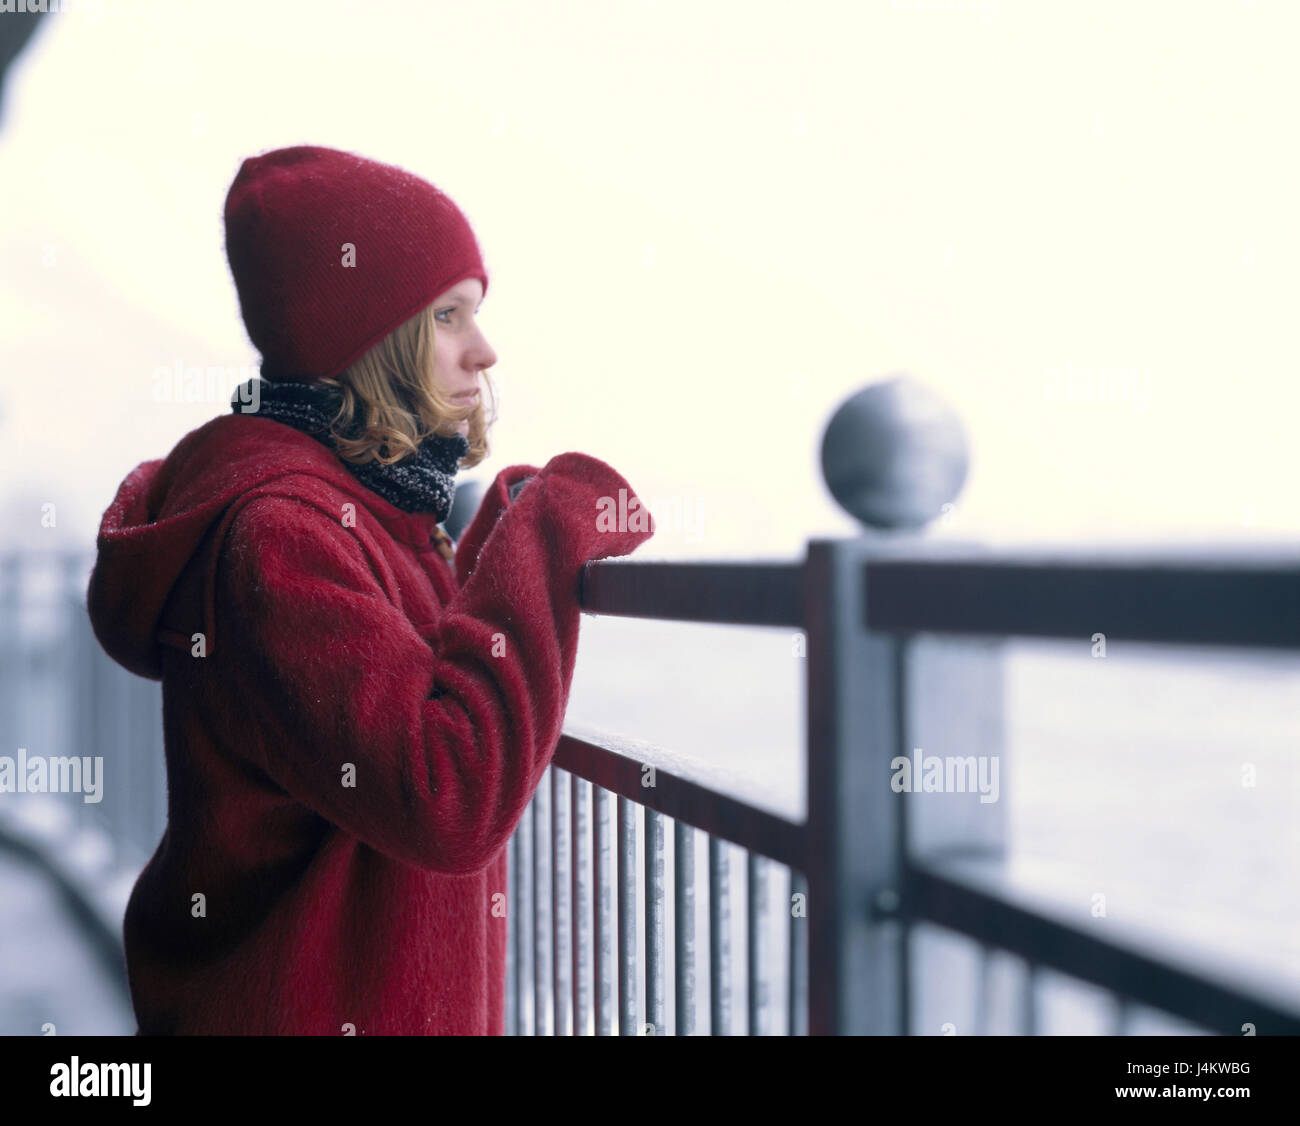 Balustrades, woman, young, winter clothes red, view, thoughtfully 20-30 years, Jung-limited, winter casing, casing, cap, headgear, conception, loneliness, only, exit, sadly, feelings, emotion, unhappily, winter Stock Photo